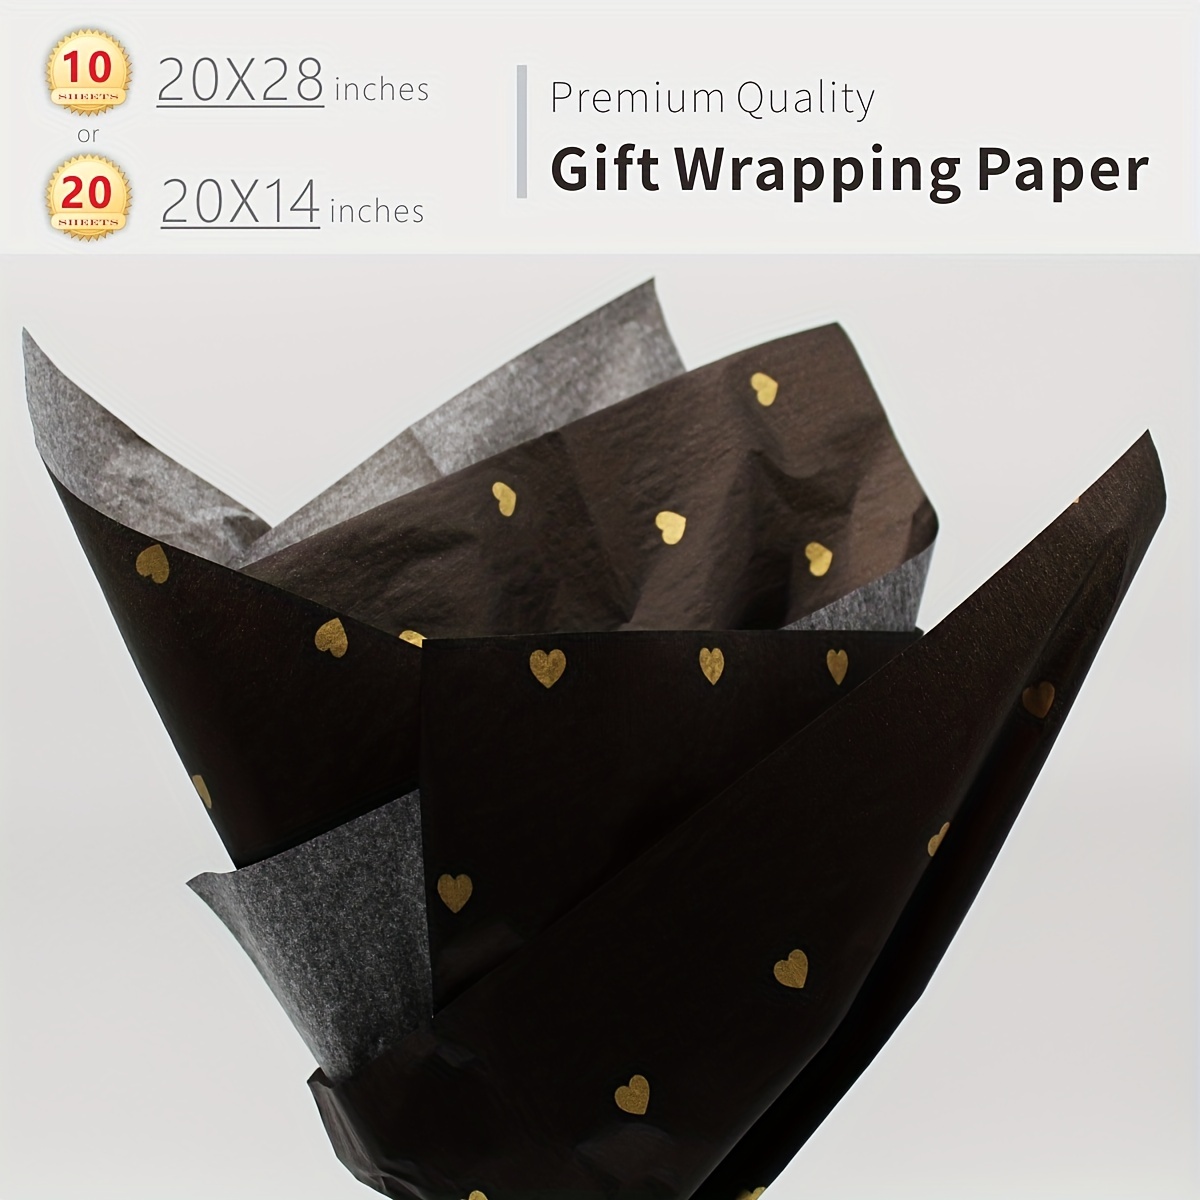 RUSPEPA Gift Wrapping Tissue Paper - Black Tissue Paper for Gift Wrap, Art  Crafts, DIY, Pack Bags, Birthday, Wedding and More - 19.5 x 27.5 inches 